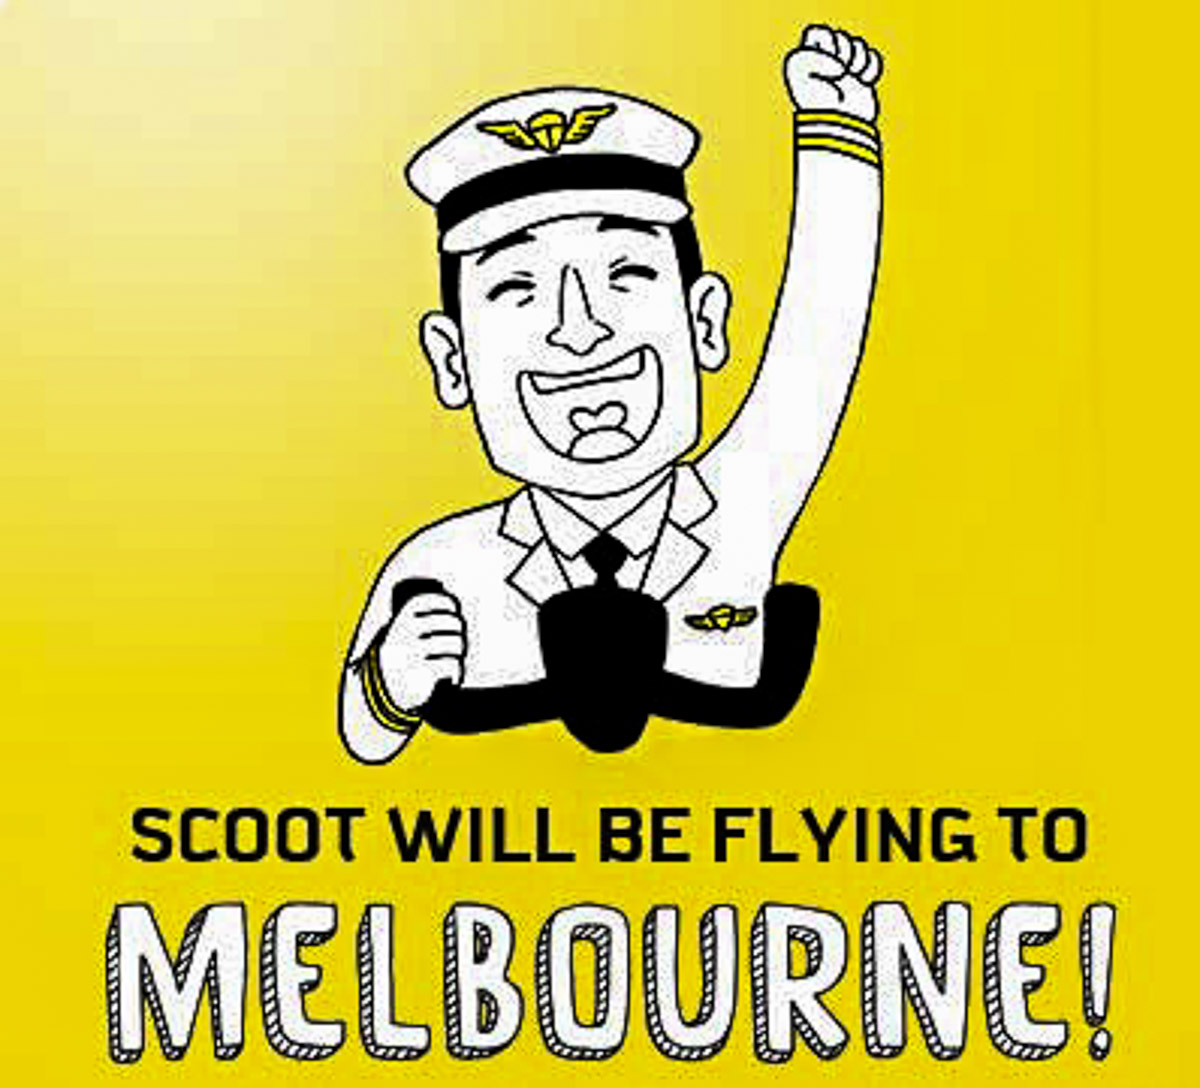 Scoot to Melbourne!